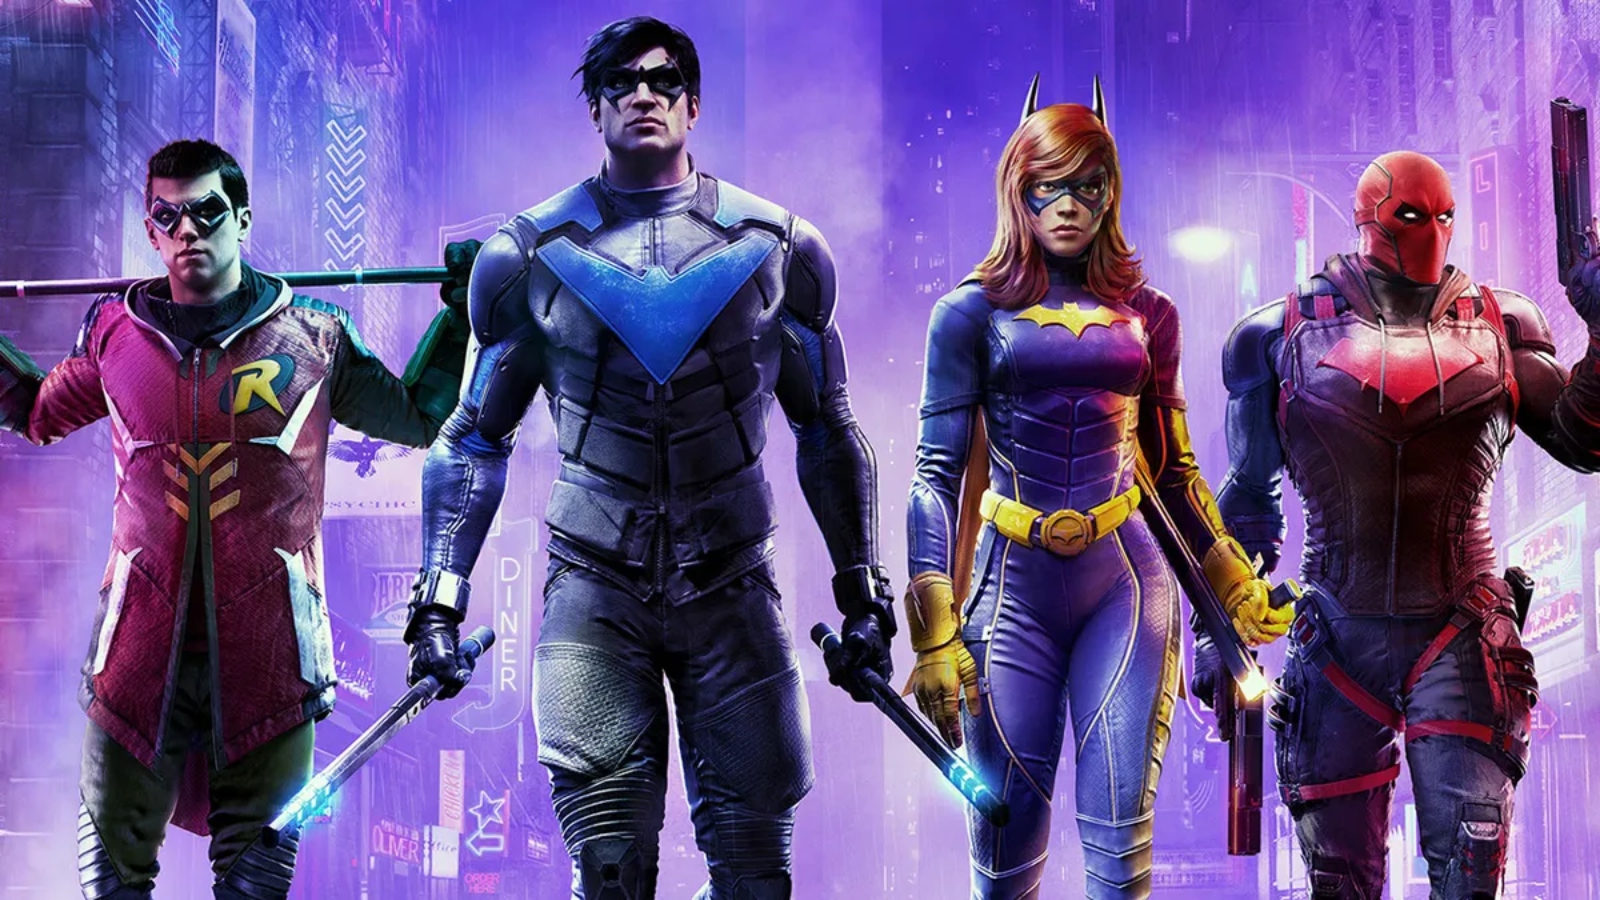 GamerCityNews Gotham-Knights-Robin-Nightwing-Batgirl-Jason-Todd The ‘Resident Evil 4’ Remake Trailer Leaps to Promising Heights While ‘Gotham Knights’ Stumbles at the First Hurdle 